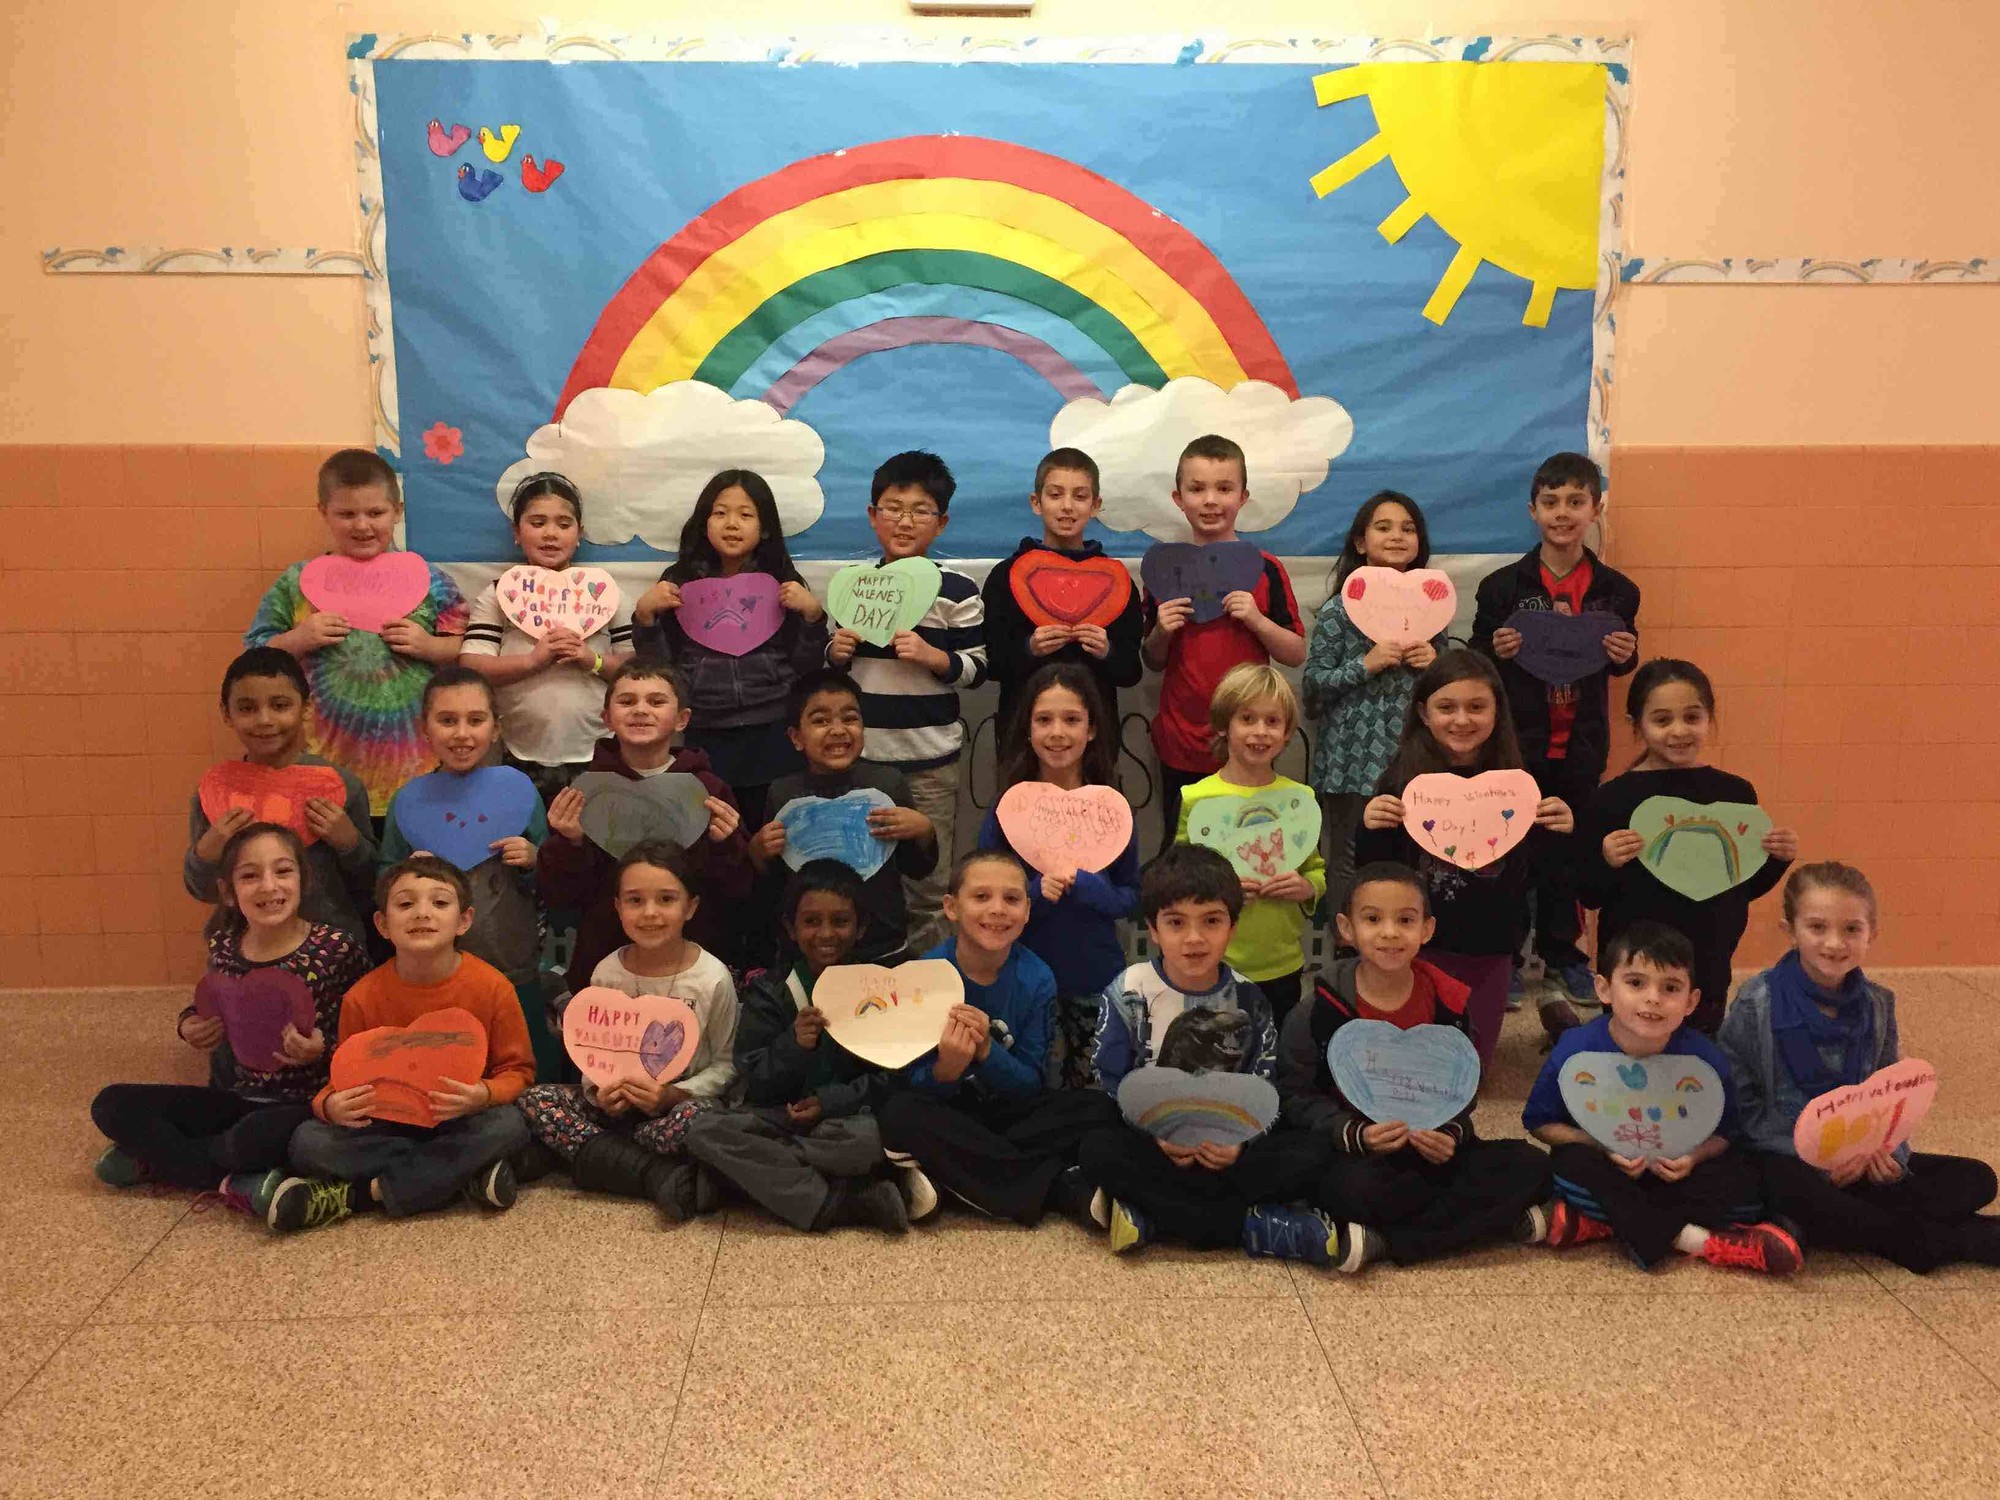 Second-graders were happy to craft heart-shaped works of art for their heroes, East Meadow School District officials said.